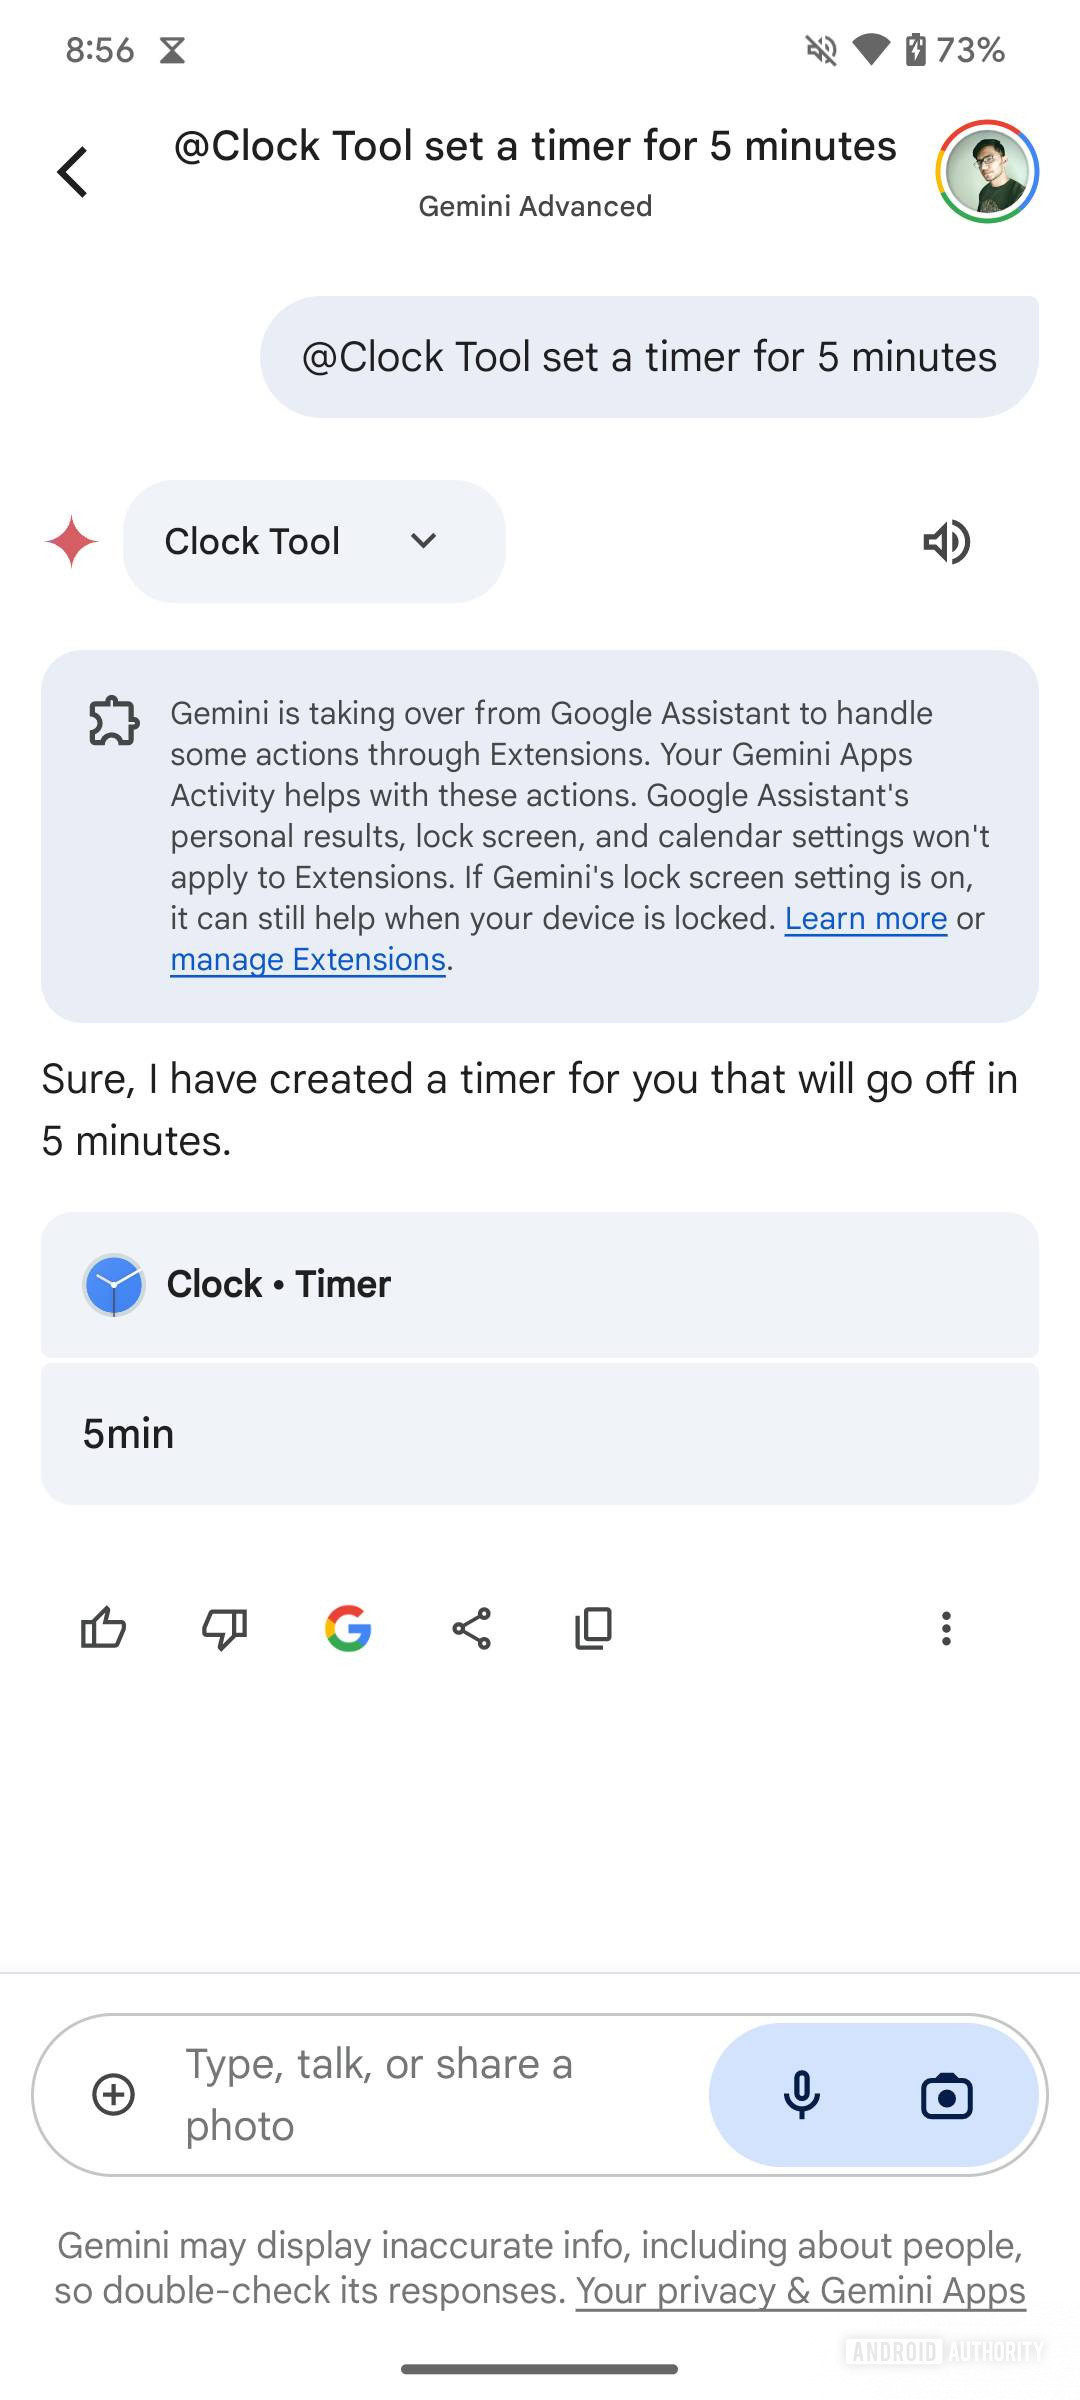 Screnshot showing Gemini using the upcoming Clock tool extension to set a timer.